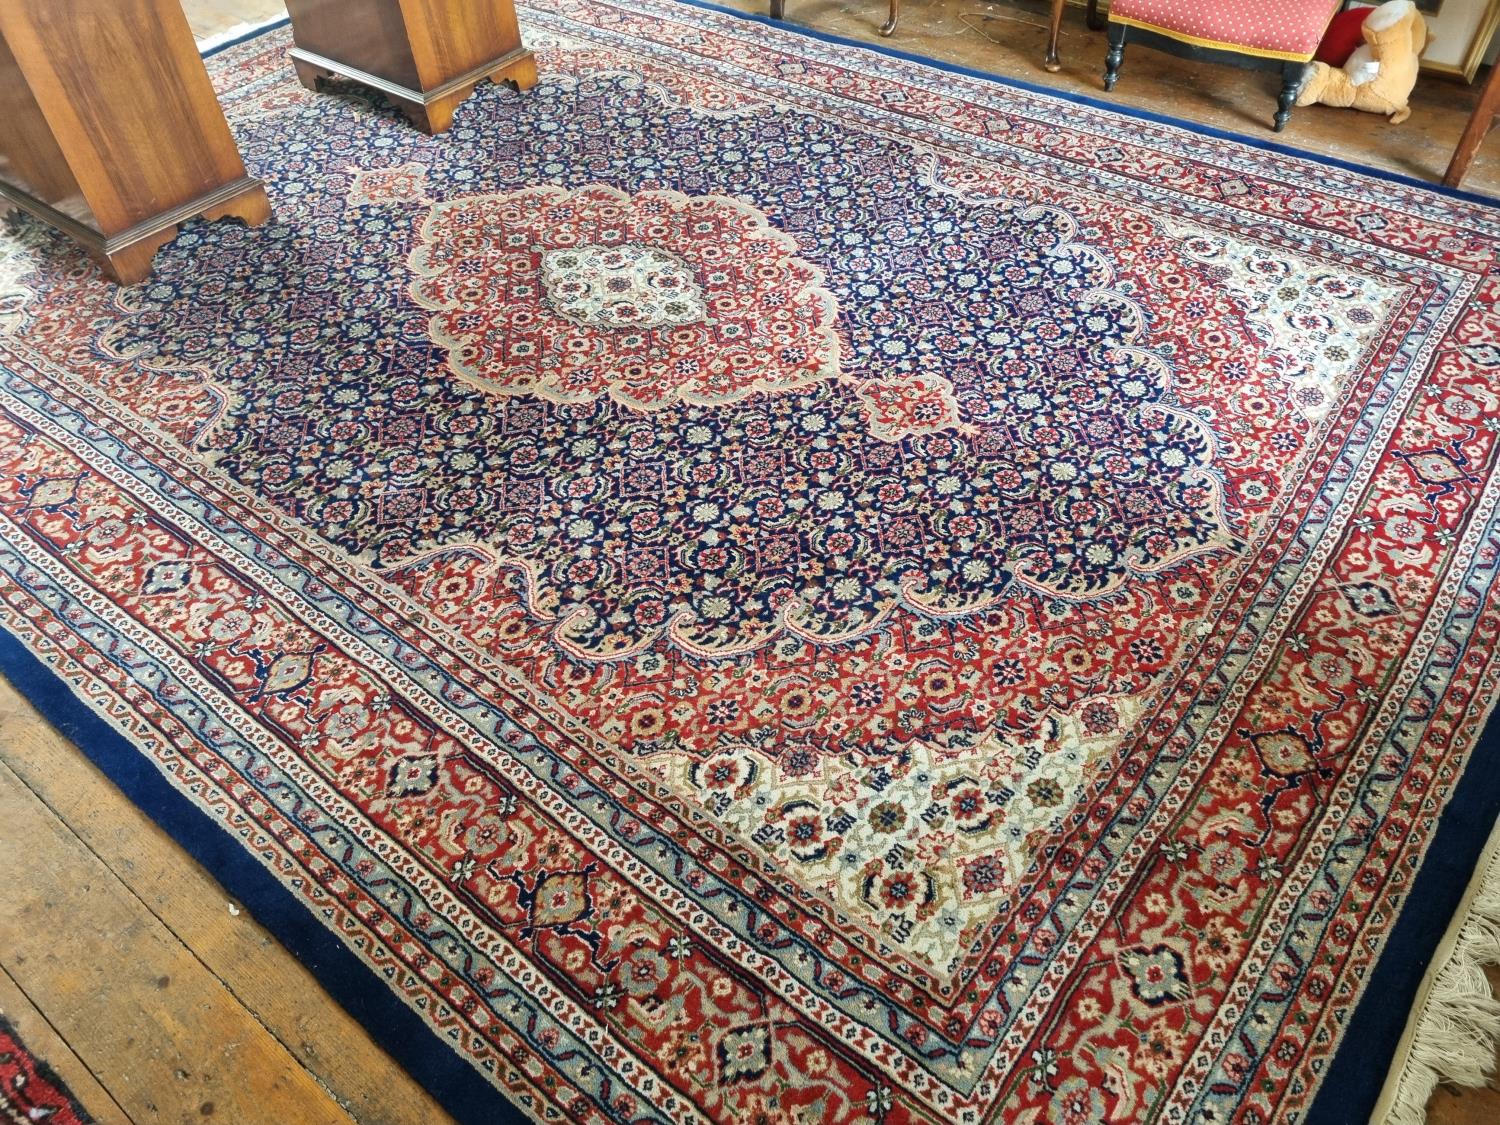 A very large blue ground Hindu Persian Carpet with medallion design and multi borders.